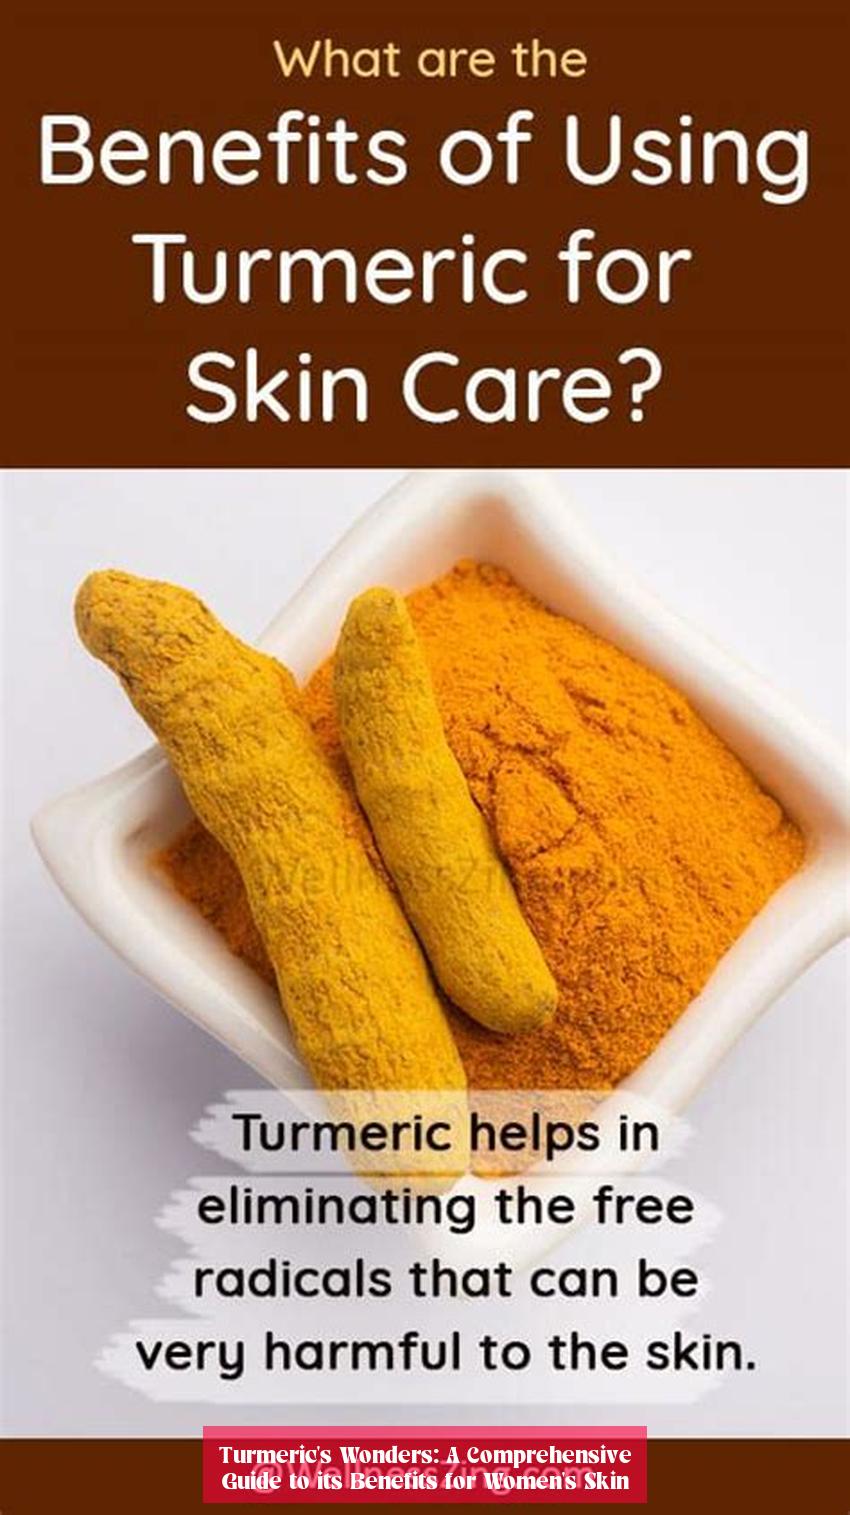 Turmeric's Wonders: A Comprehensive Guide to its Benefits for Women's Skin